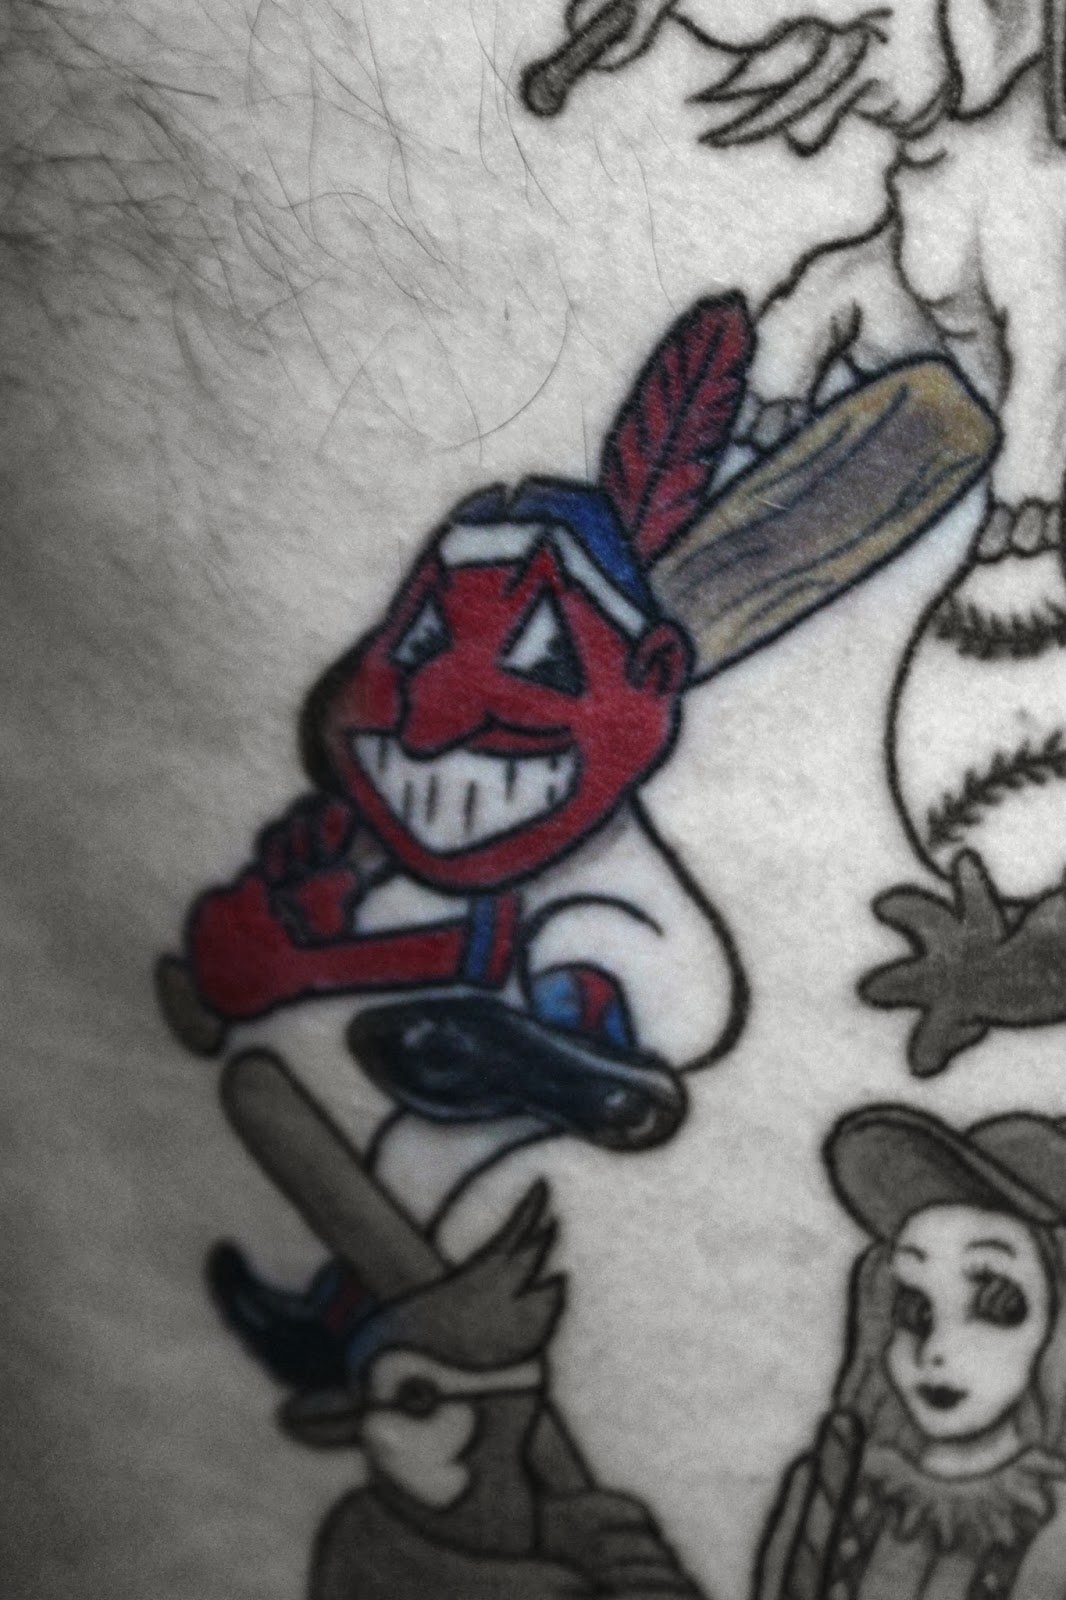 Hats and Tats: A Lifestyle: July 20- Cleveland Indians